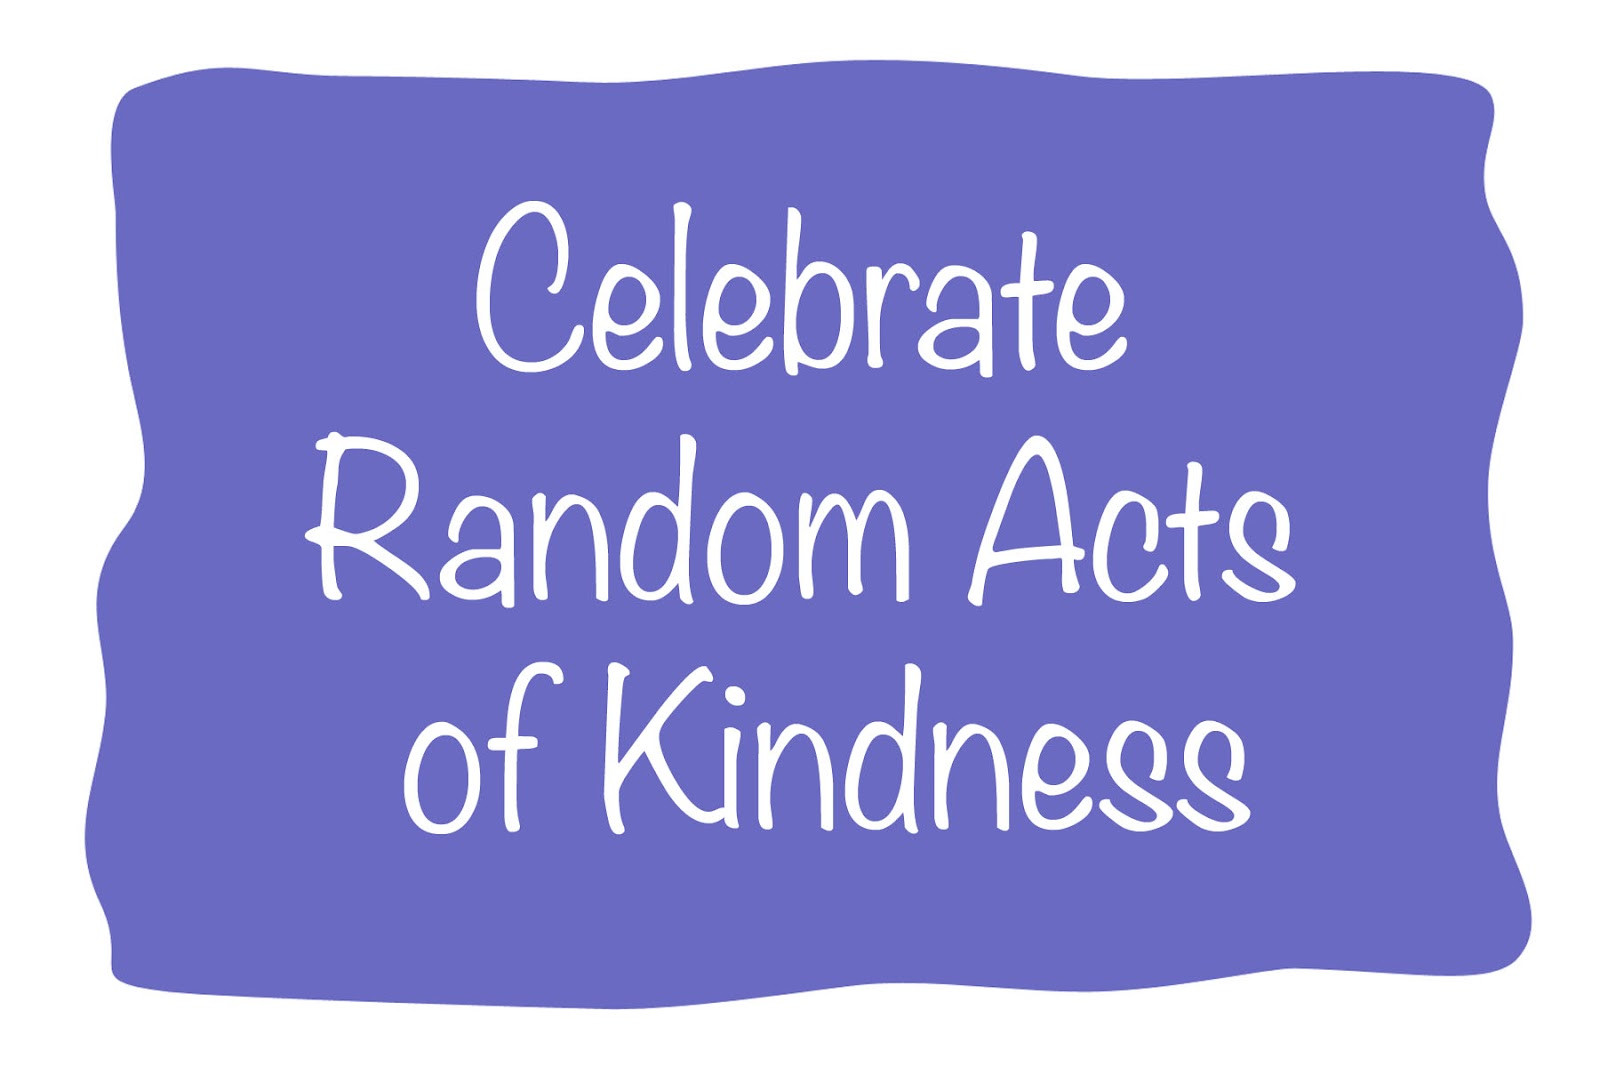 Quote About Random Acts Of Kindness
 Pure Thoughts Seeking All Things Virtuous Lovely or of